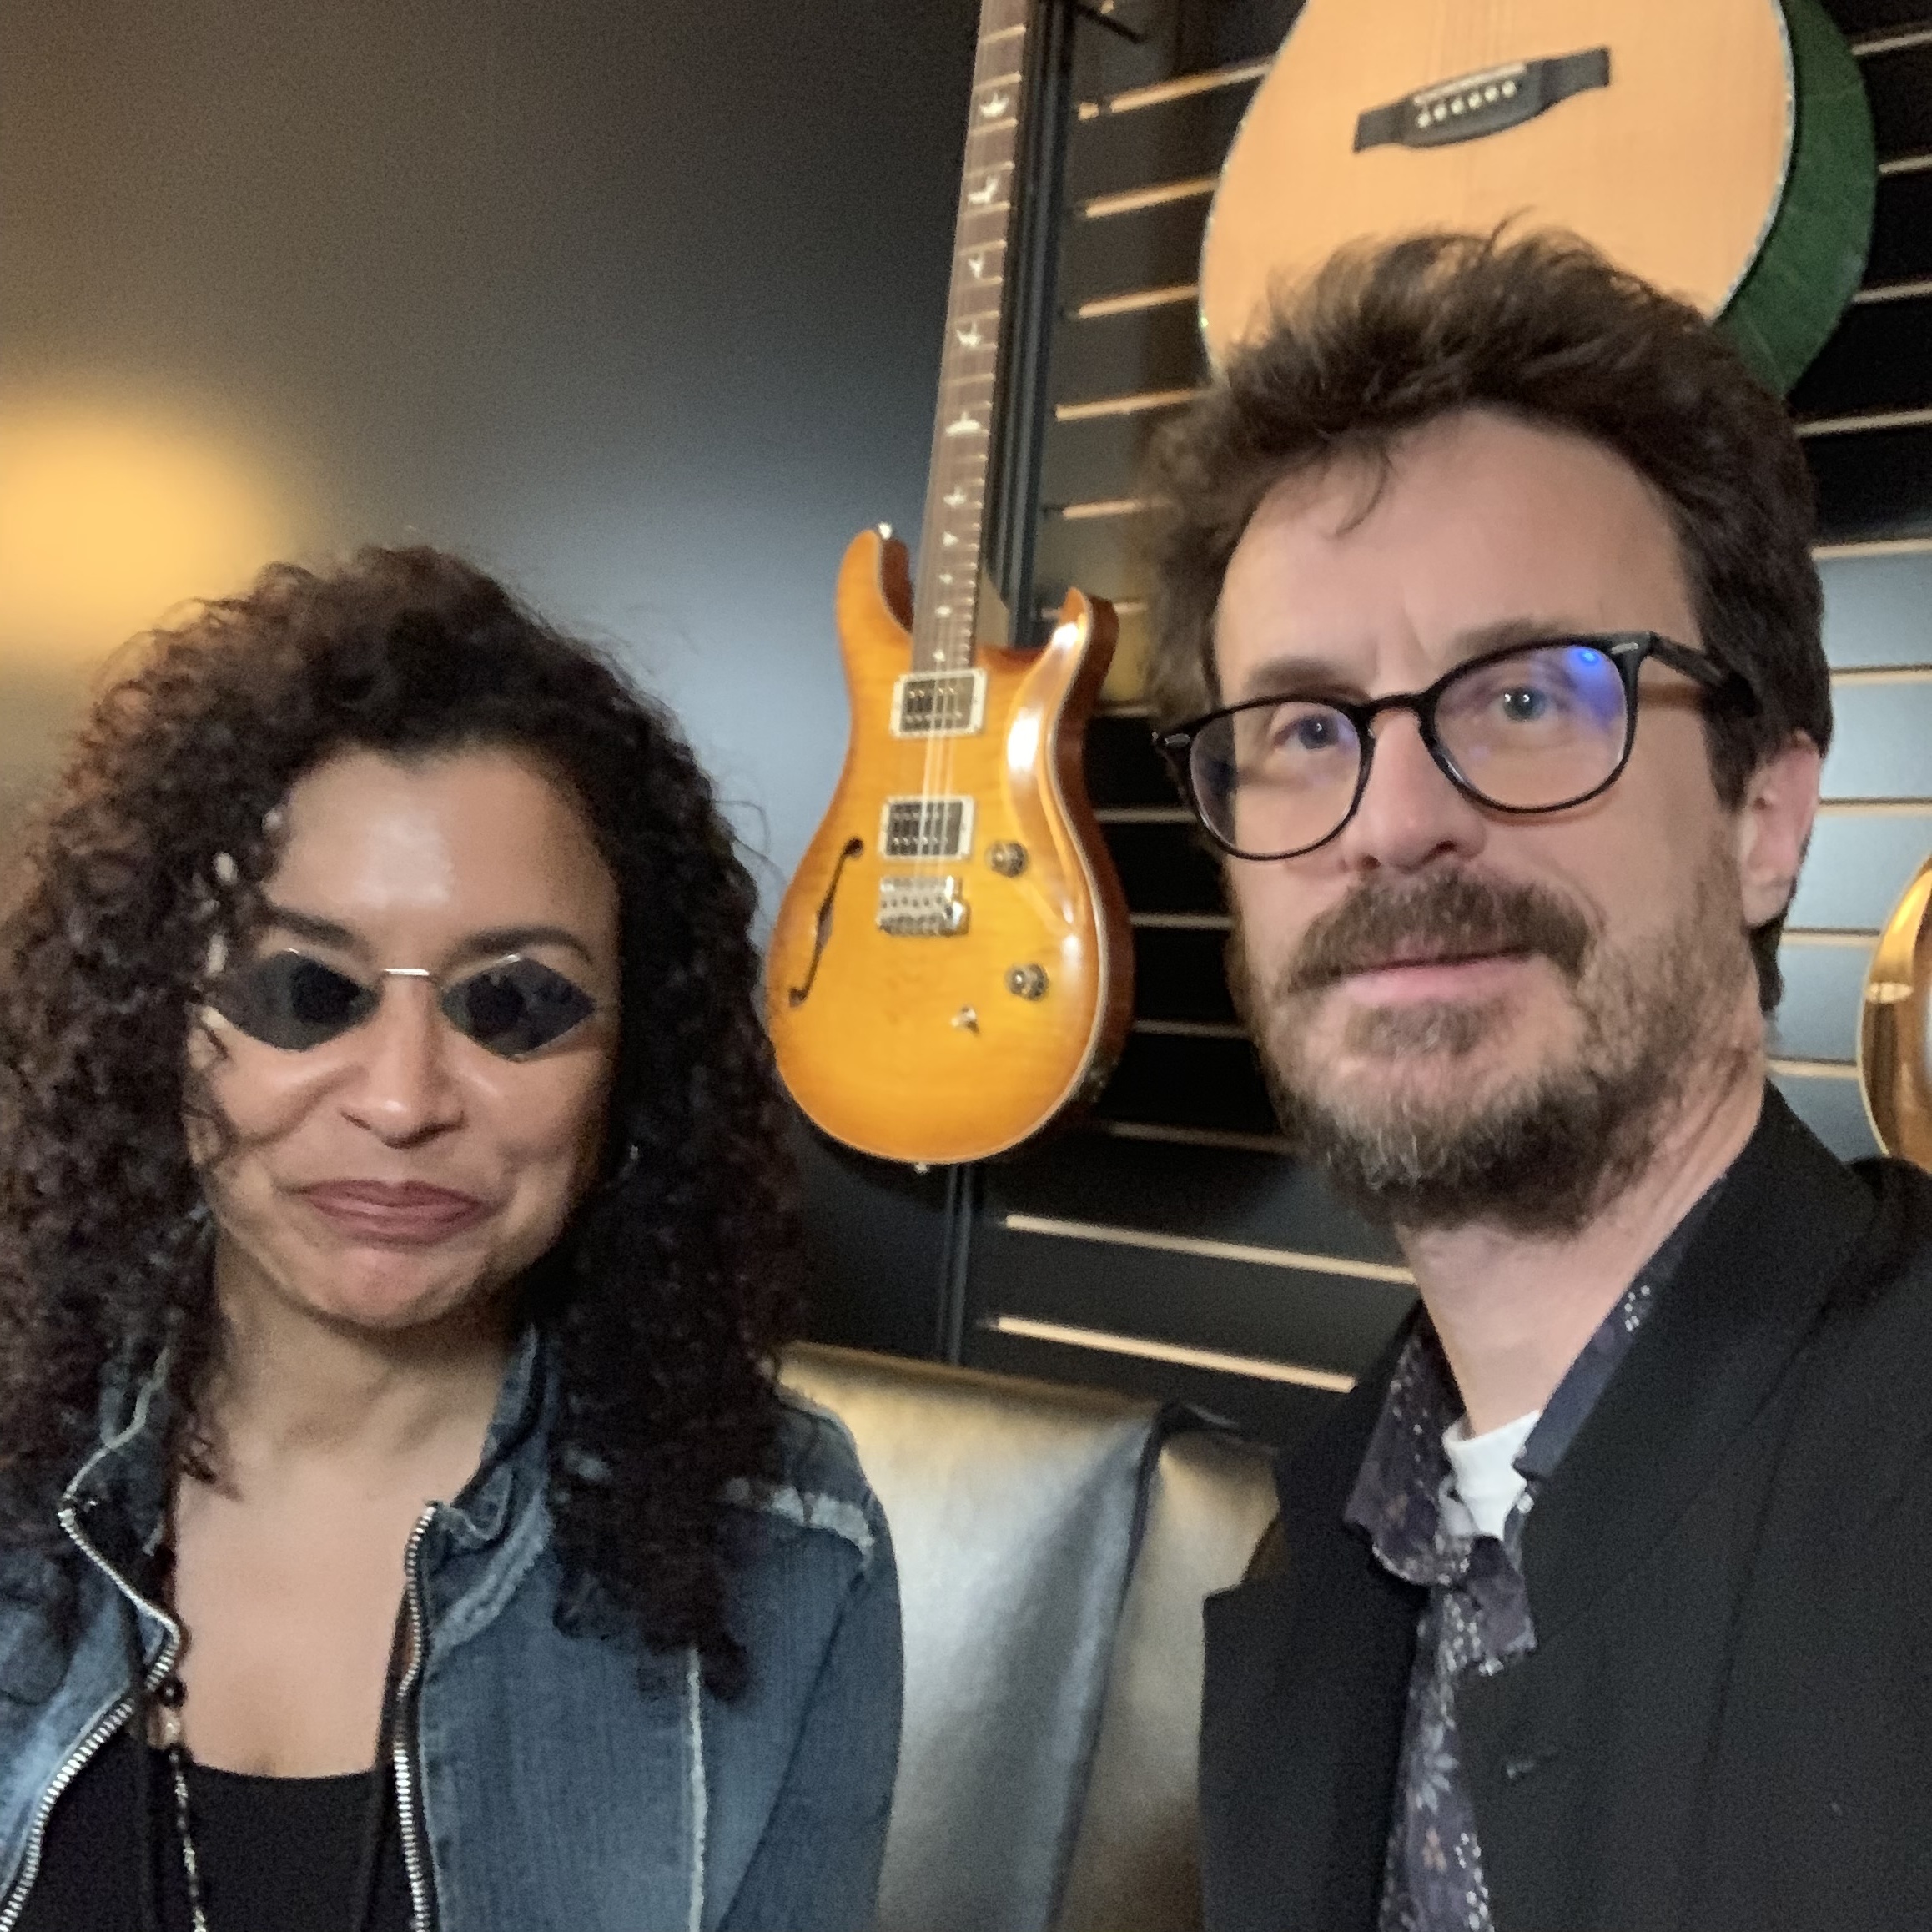 Rhonda Smith interview - Prince and Jeff Beck bass player - 2019 Winter NAMM